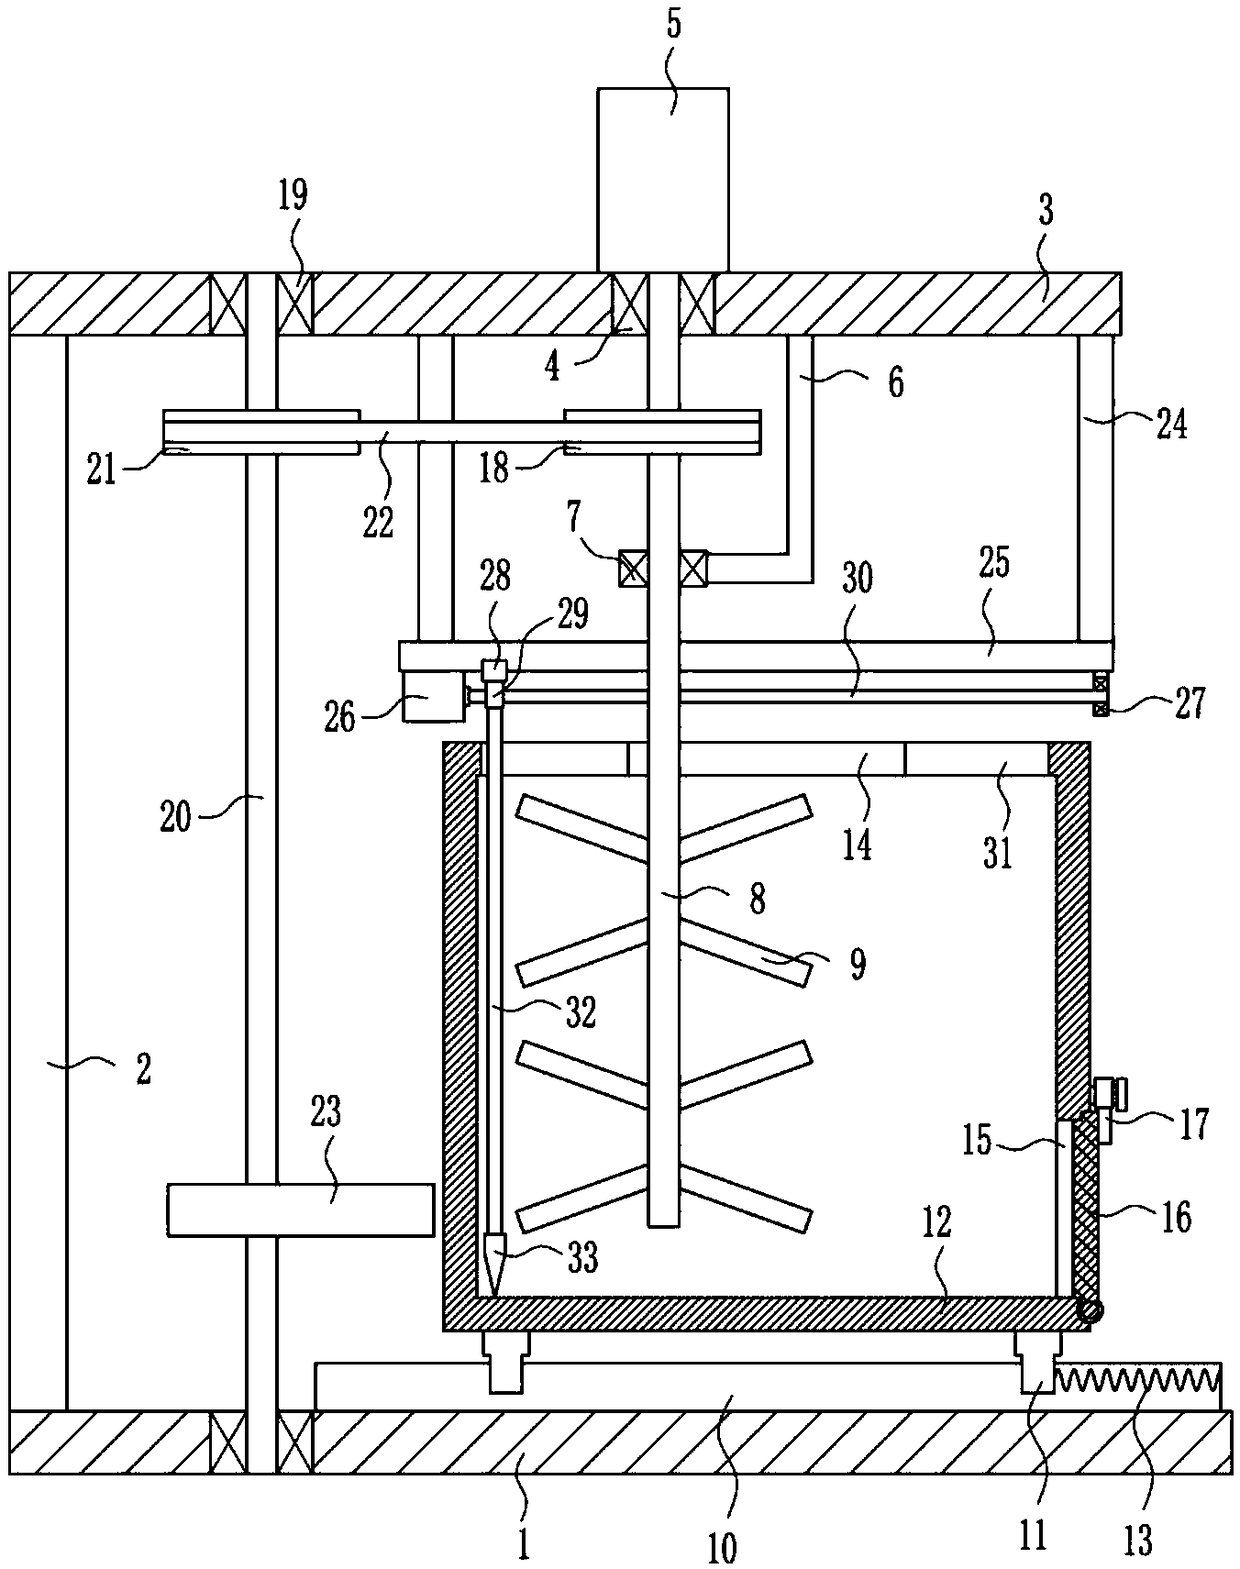 Concrete stirring device used for hydraulic engineering